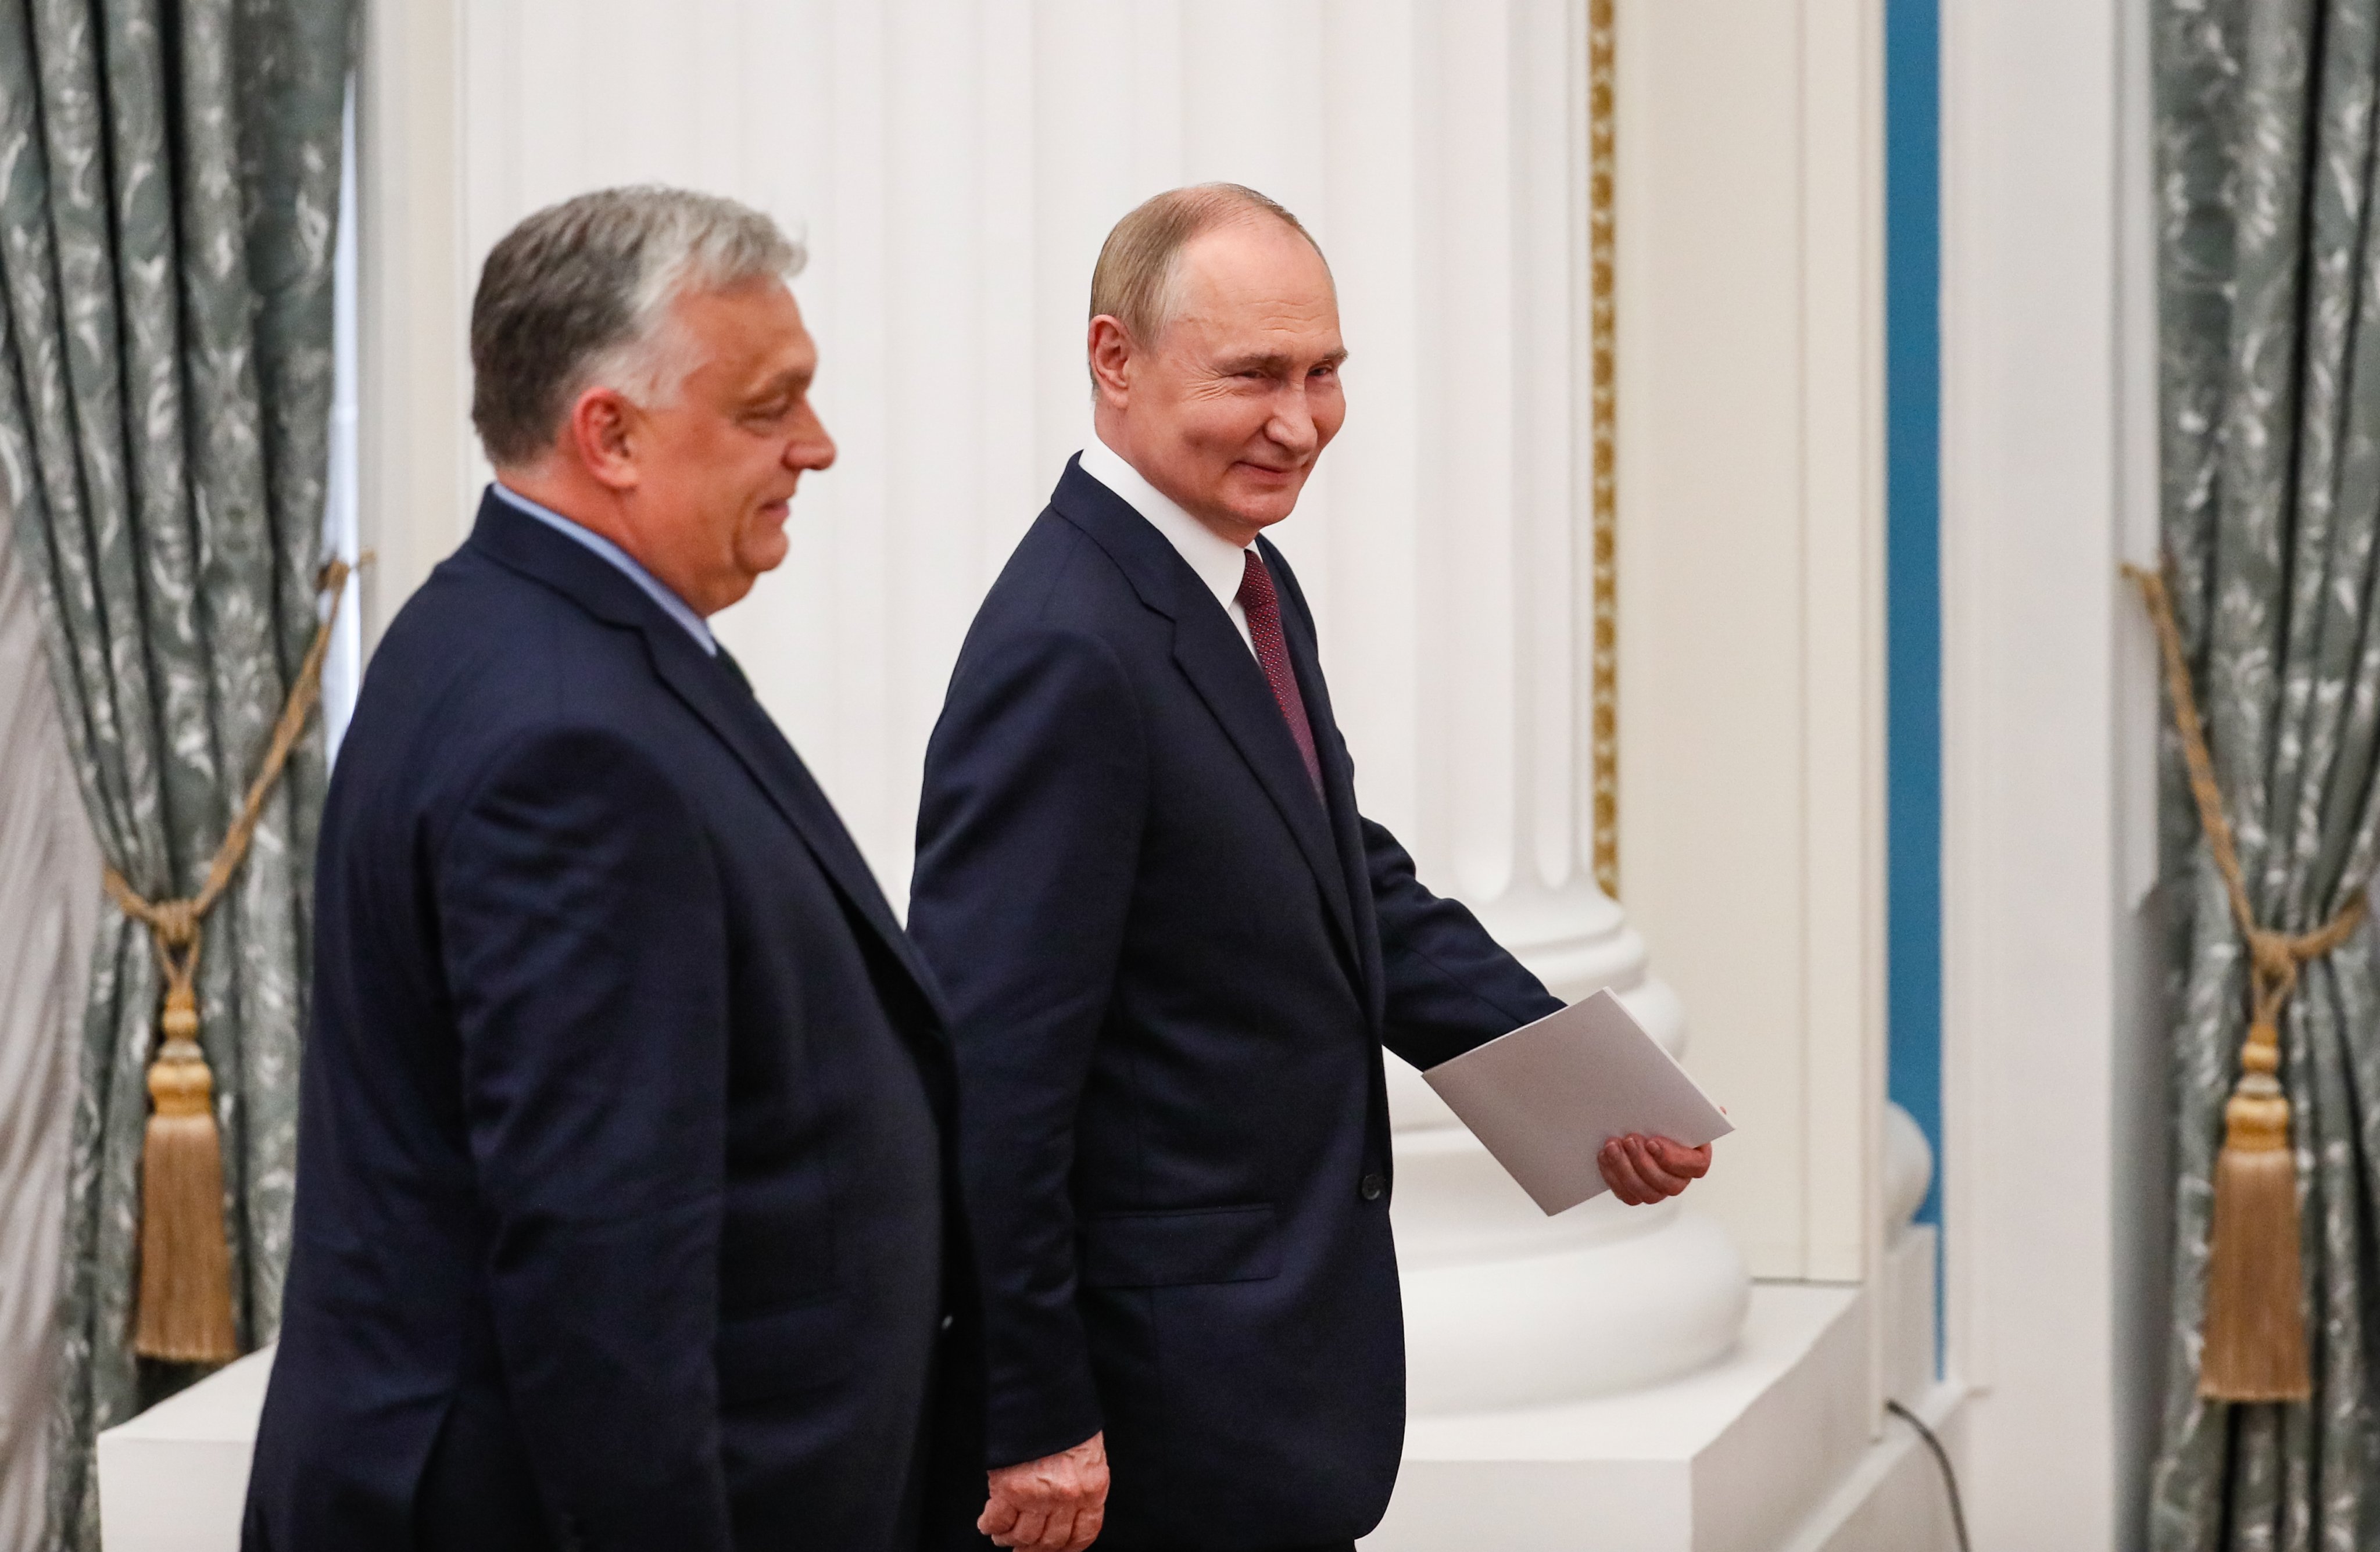 Hungarian Prime Minister Viktor Orban (left) and Russian President Vladimir Putin leave after a press conference in Moscow on July 5. Photo: EPA-EFE